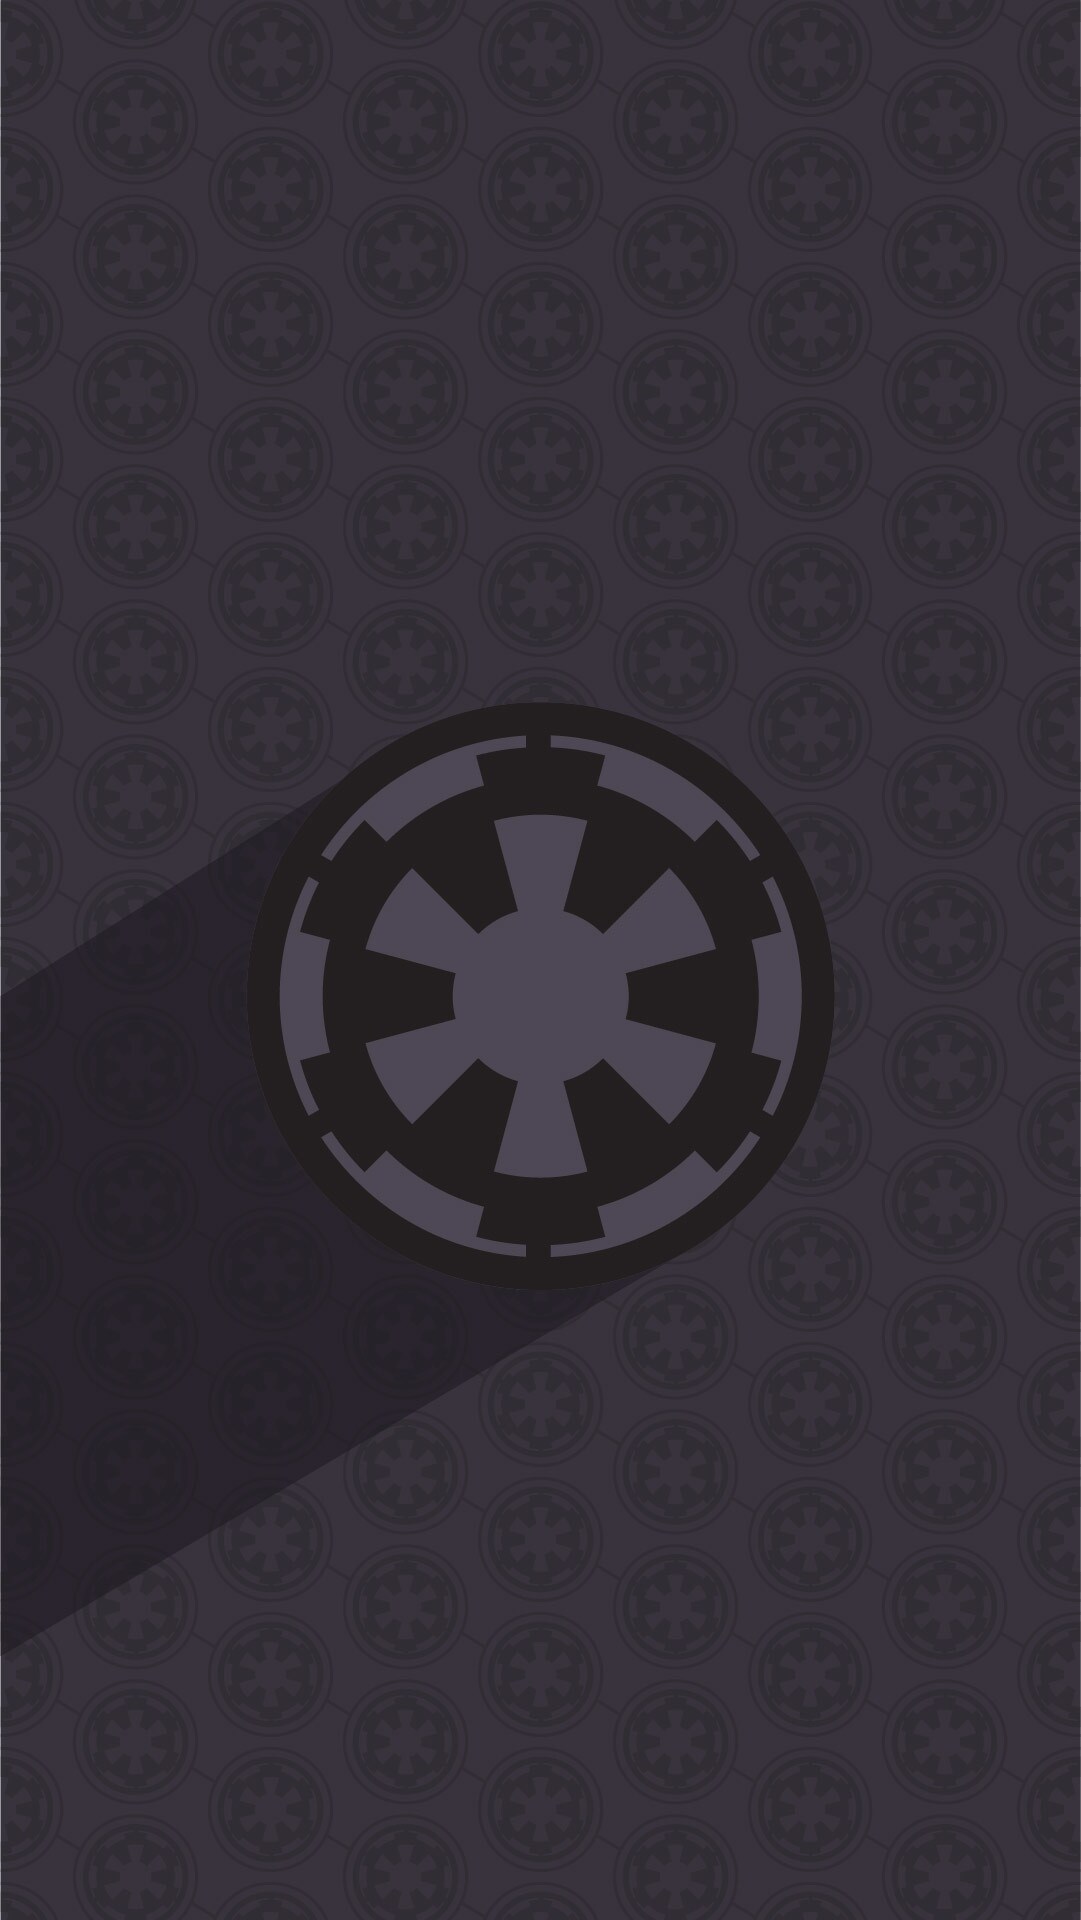 Star Wars Wallpapers for Mobile Devices 